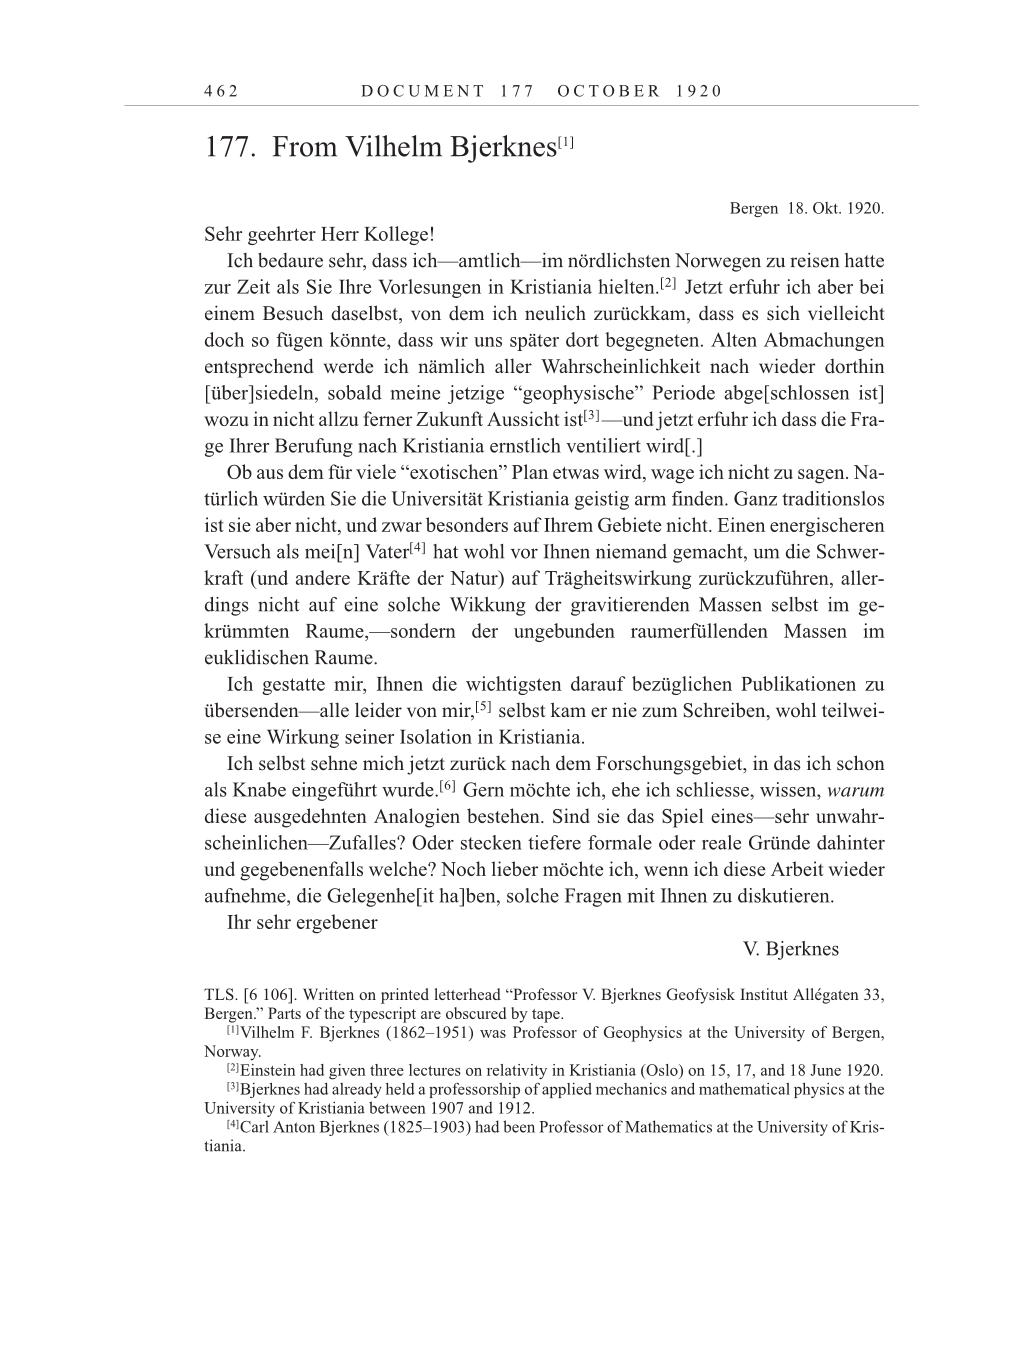 Volume 10: The Berlin Years: Correspondence May-December 1920 / Supplementary Correspondence 1909-1920 page 462